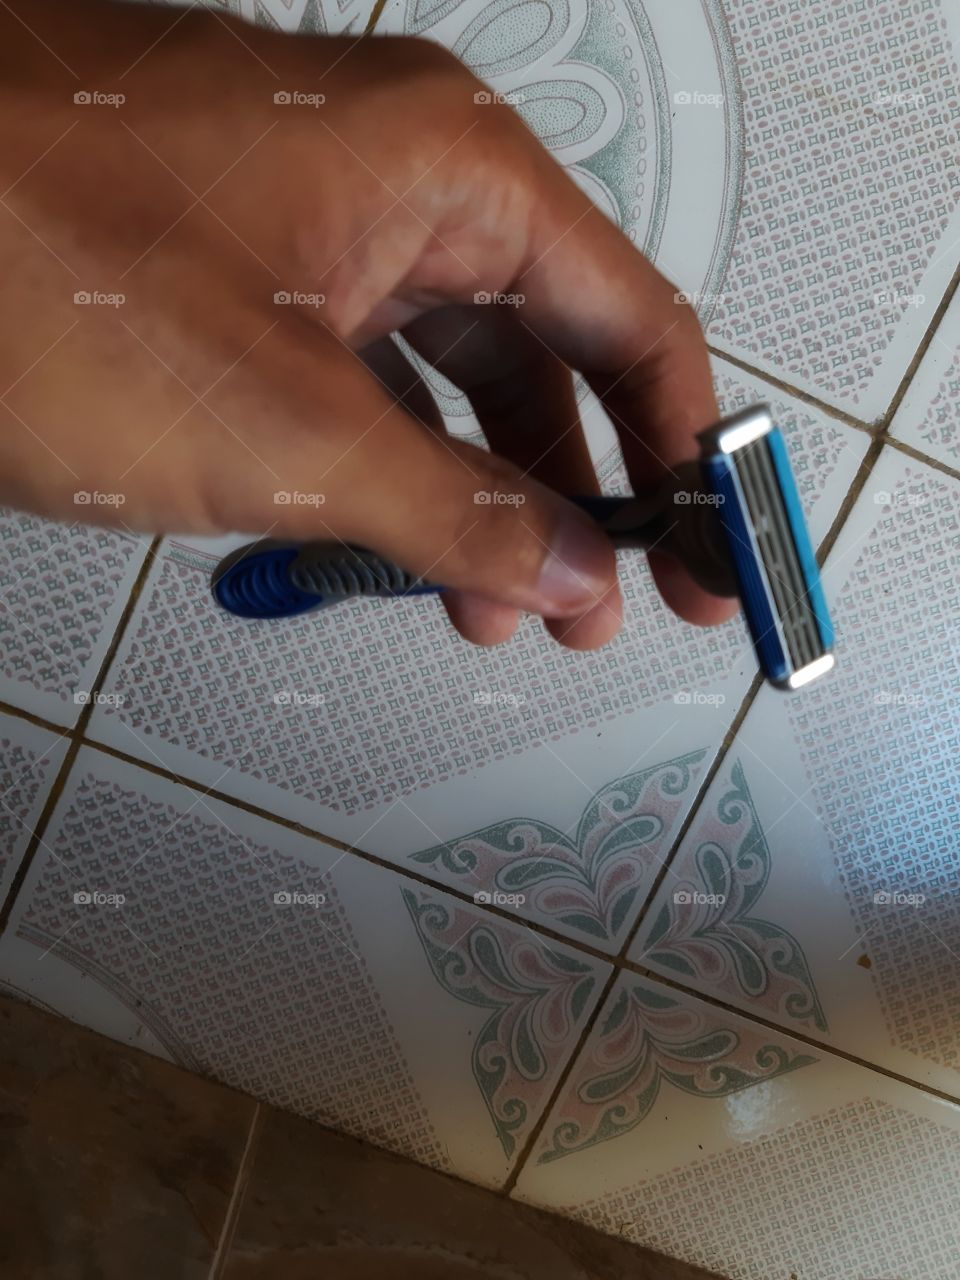 A blue shaver in a left hand.